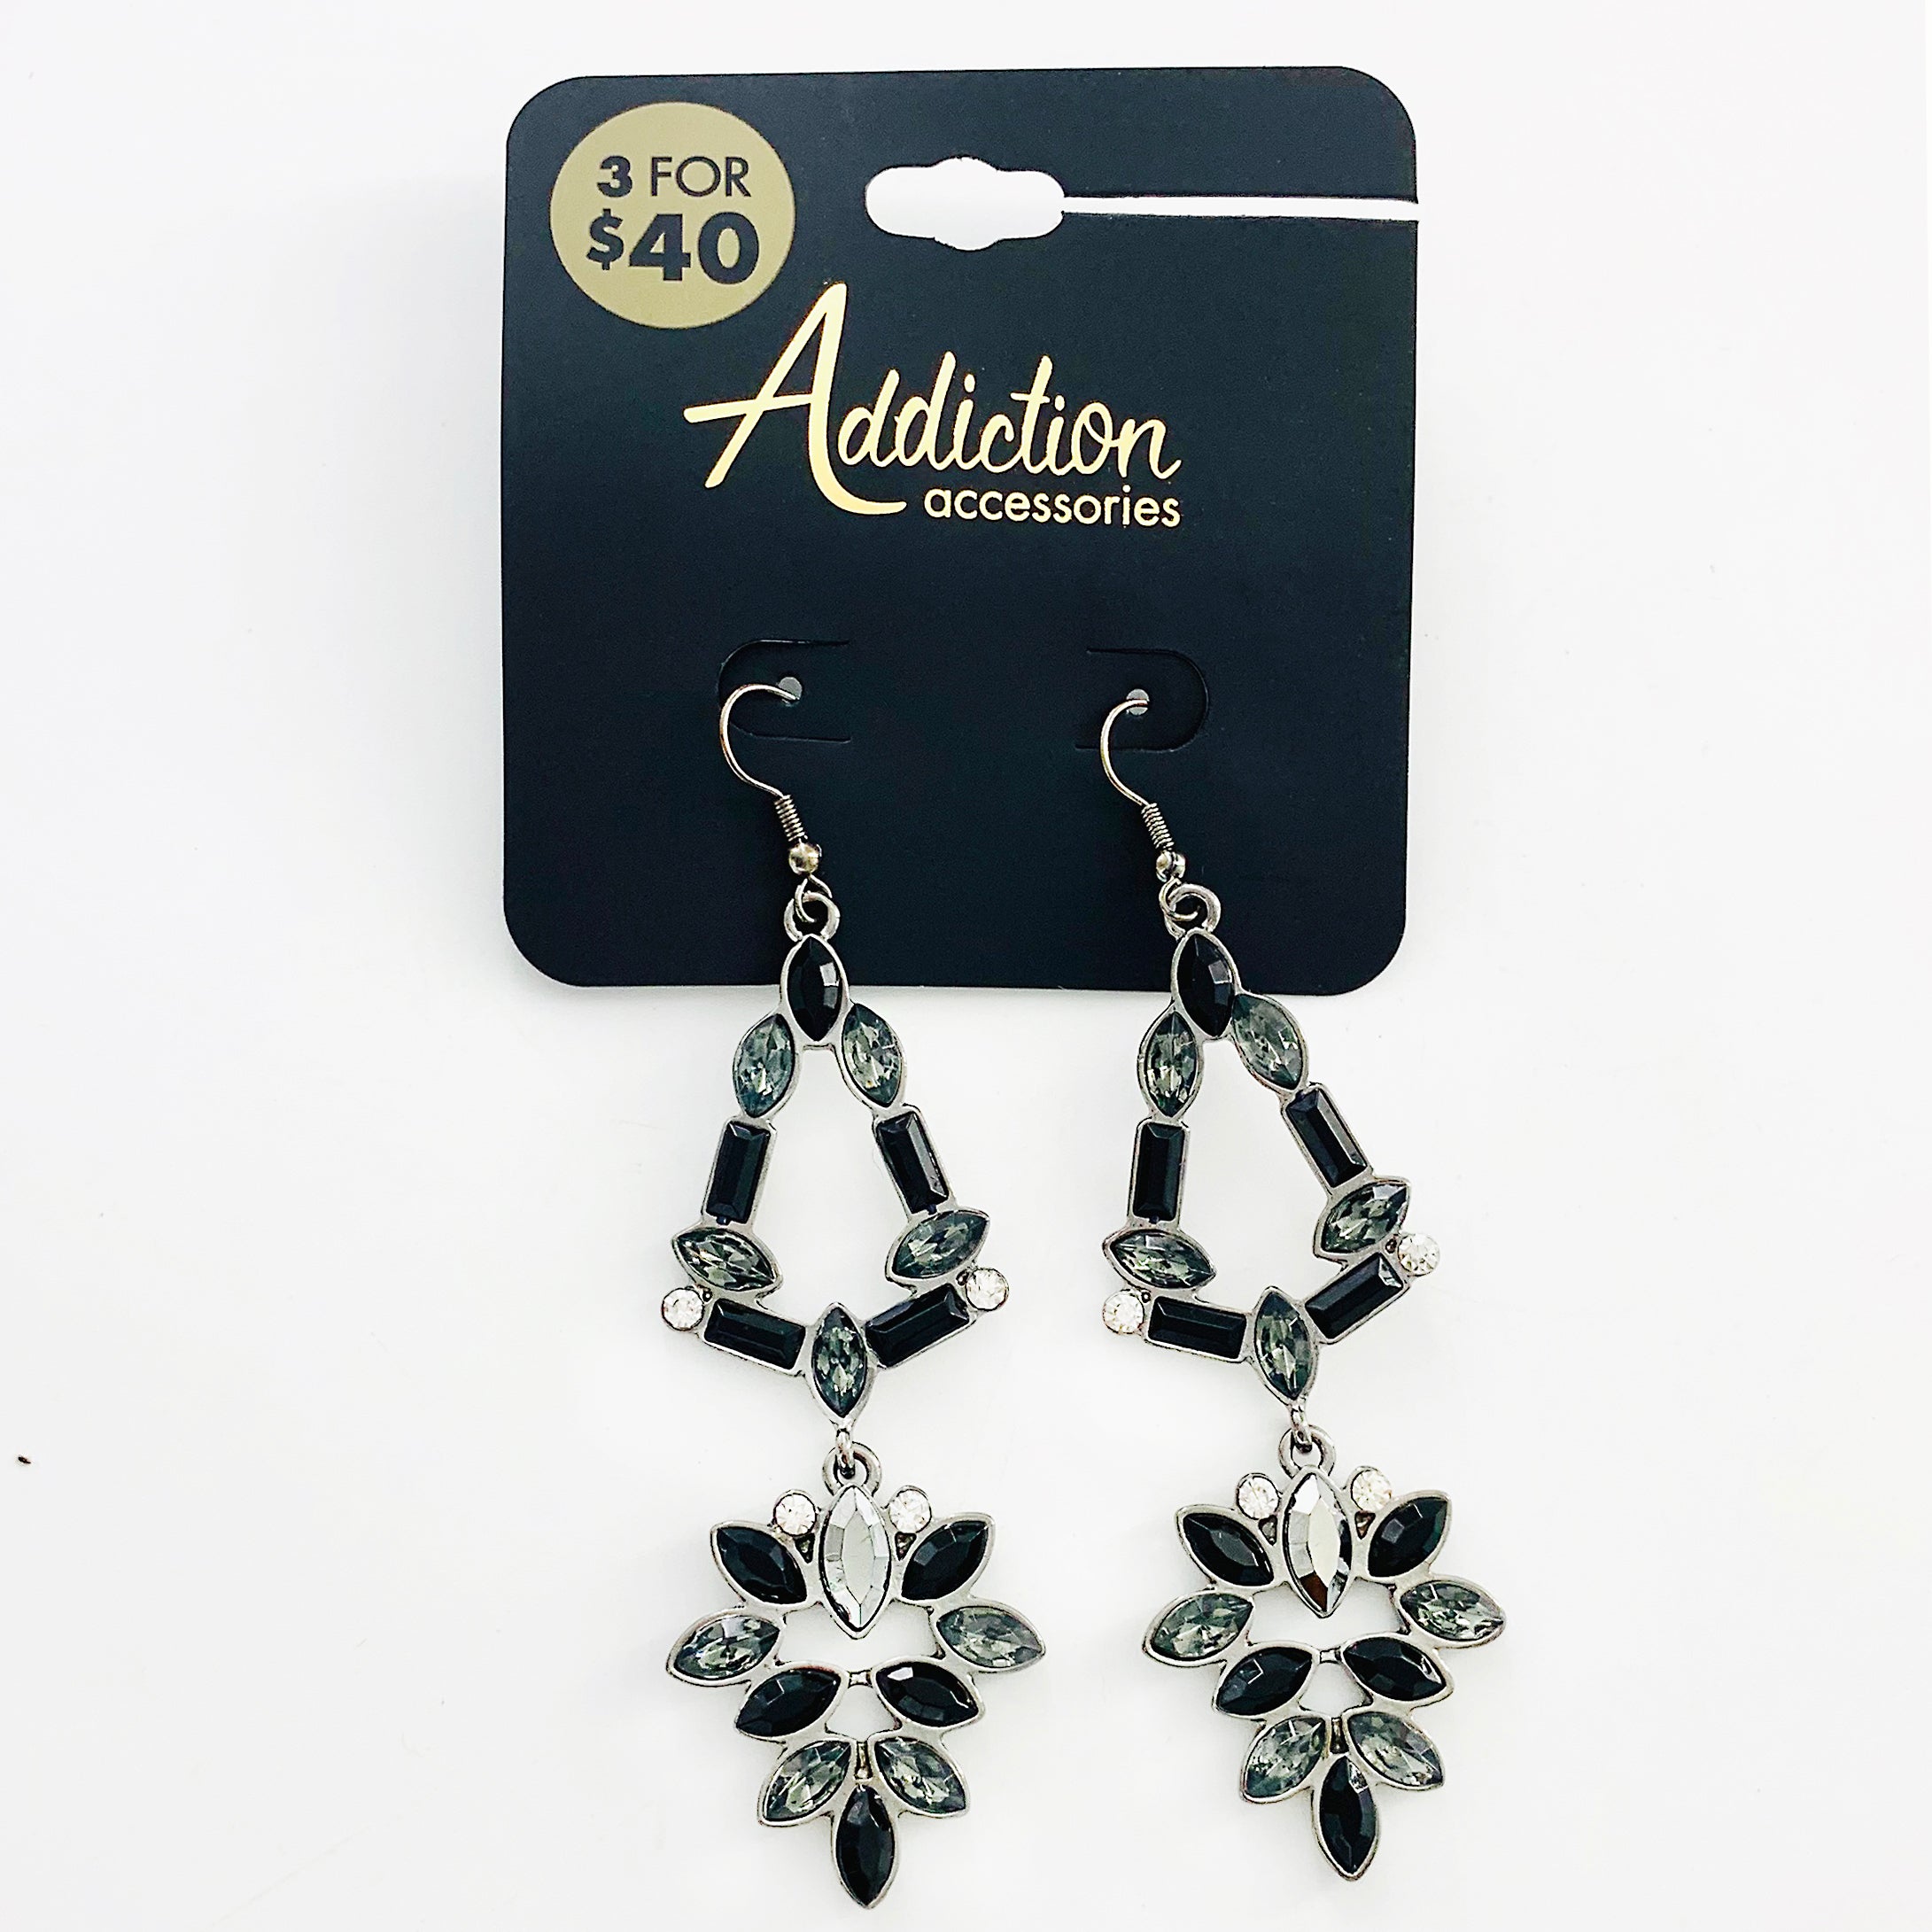 Dangling earrings with grey and black facet stones